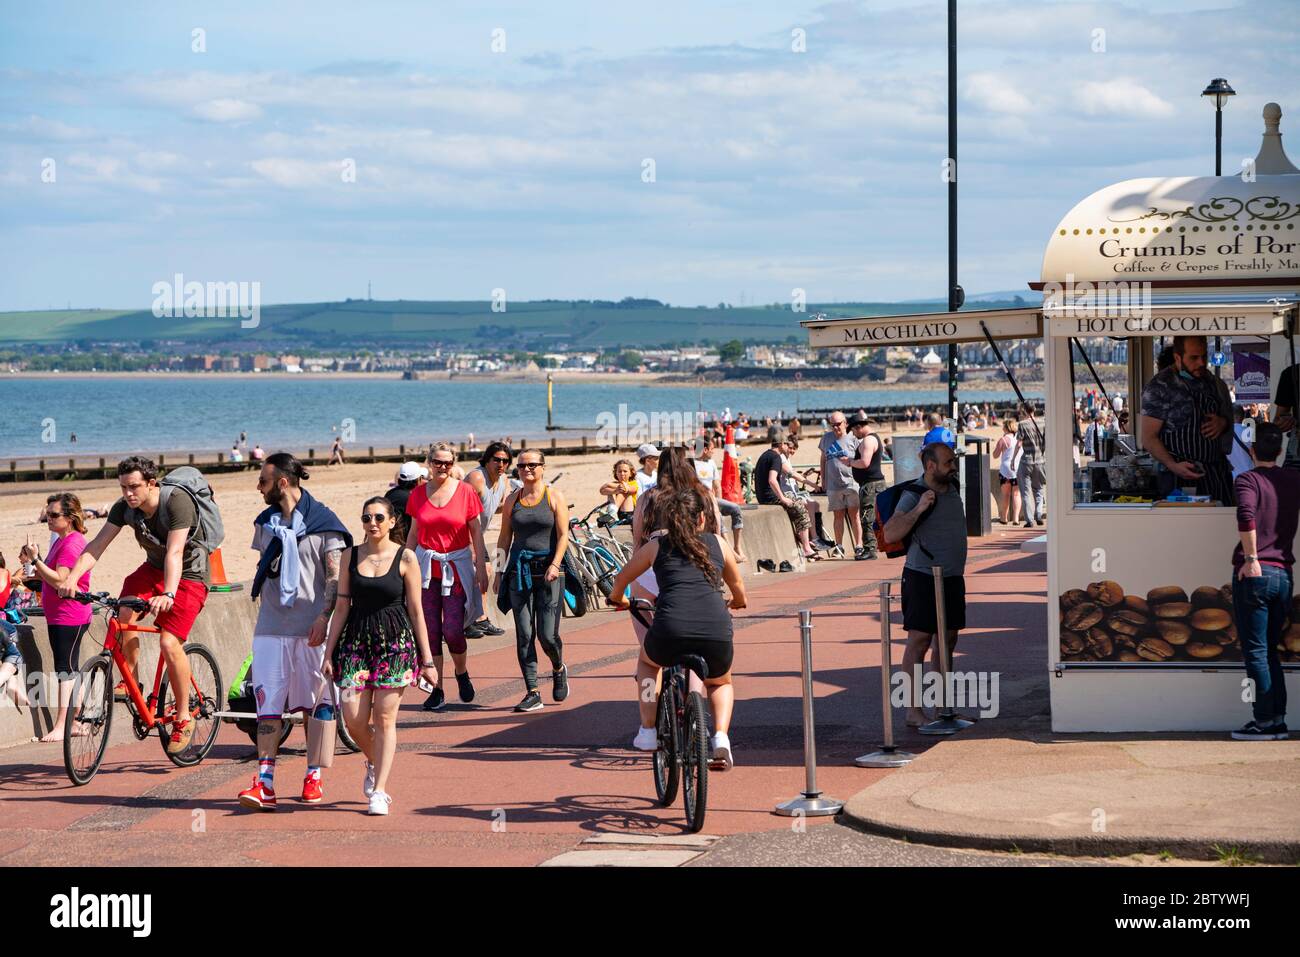 Portobello, Scotland, UK. 28 May 2020. Warm sunny weather with temperatures reaching 24C brought many people to the beach and promenade at Portobello, Edinburgh. The public seem to sense that the lockdown is being relaxed are are taking advantage of the good weather to sunbathe and enjoy the many cafes that are now offering takeaway snacks. Iain Masterton/Alamy Live News Stock Photo